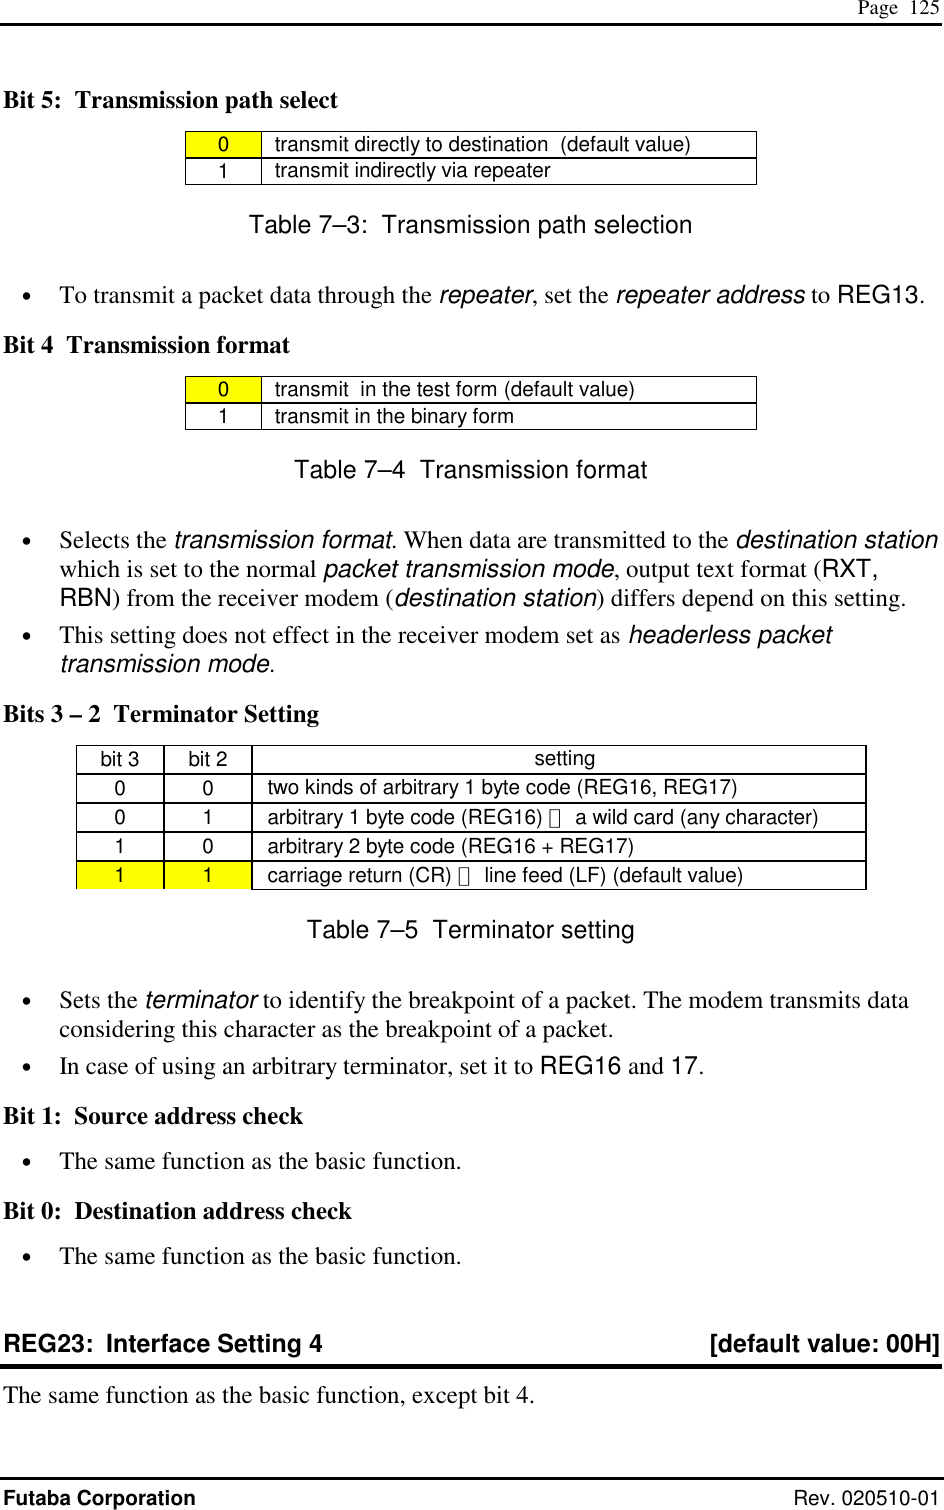  Page  125 Futaba Corporation Rev. 020510-01 Bit 5:  Transmission path select 0   transmit directly to destination  (default value) 1   transmit indirectly via repeater Table 7–3:  Transmission path selection •  To transmit a packet data through the repeater, set the repeater address to REG13.  Bit 4  Transmission format 0   transmit  in the test form (default value) 1   transmit in the binary form Table 7–4  Transmission format •  Selects the transmission format. When data are transmitted to the destination station which is set to the normal packet transmission mode, output text format (RXT, RBN) from the receiver modem (destination station) differs depend on this setting. •  This setting does not effect in the receiver modem set as headerless packet transmission mode. Bits 3 – 2  Terminator Setting bit 3  bit 2   setting 0  0   two kinds of arbitrary 1 byte code (REG16, REG17) 0  1   arbitrary 1 byte code (REG16) ＋ a wild card (any character) 1  0   arbitrary 2 byte code (REG16 + REG17) 1  1   carriage return (CR) ＋ line feed (LF) (default value) Table 7–5  Terminator setting •  Sets the terminator to identify the breakpoint of a packet. The modem transmits data considering this character as the breakpoint of a packet. •  In case of using an arbitrary terminator, set it to REG16 and 17.  Bit 1:  Source address check •  The same function as the basic function.  Bit 0:  Destination address check •  The same function as the basic function. REG23:  Interface Setting 4  [default value: 00H] The same function as the basic function, except bit 4. 